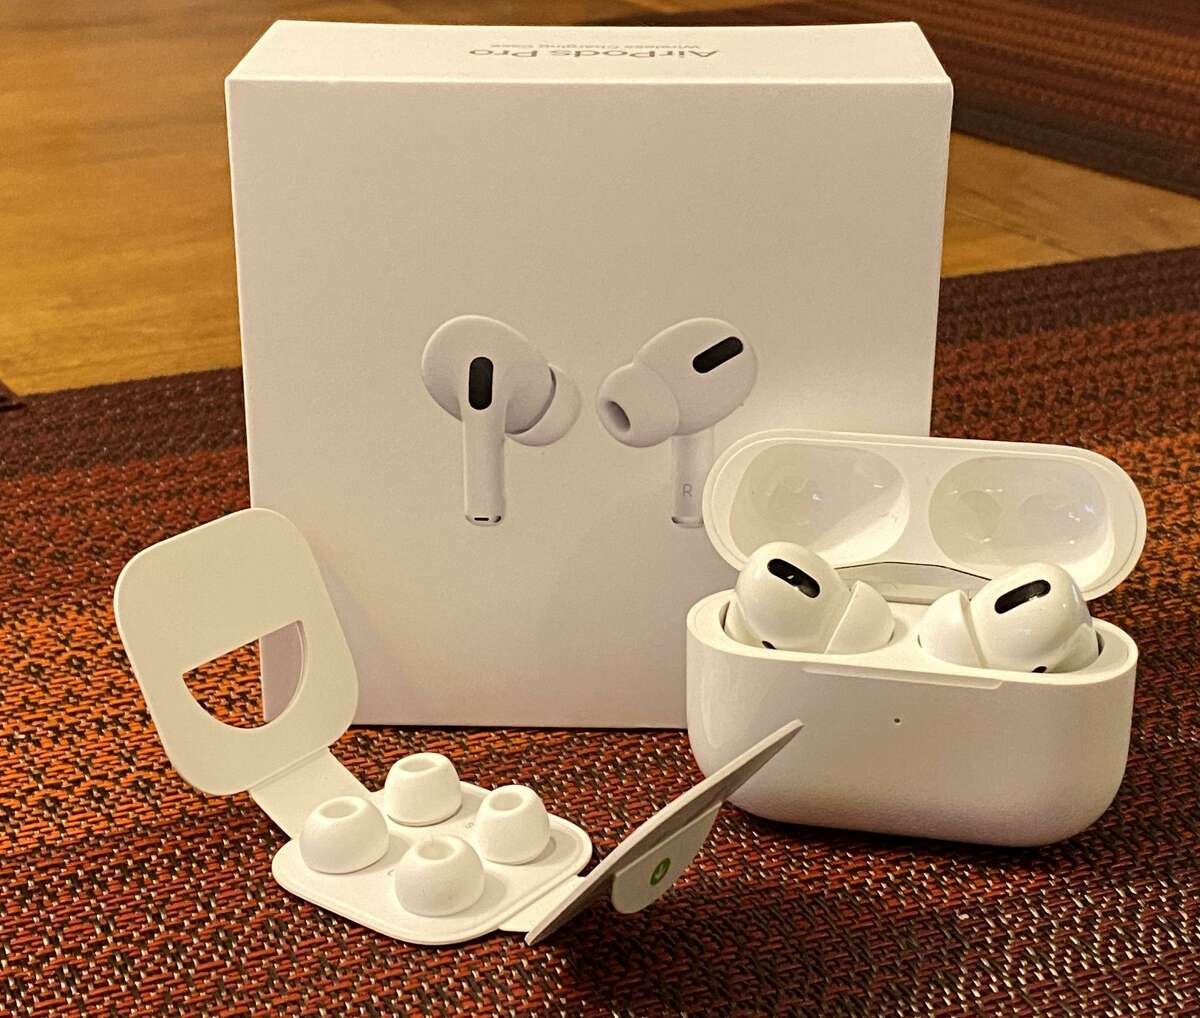 The AirPods Pro come with three sets of tips to make sure the earbuds have a good seal.